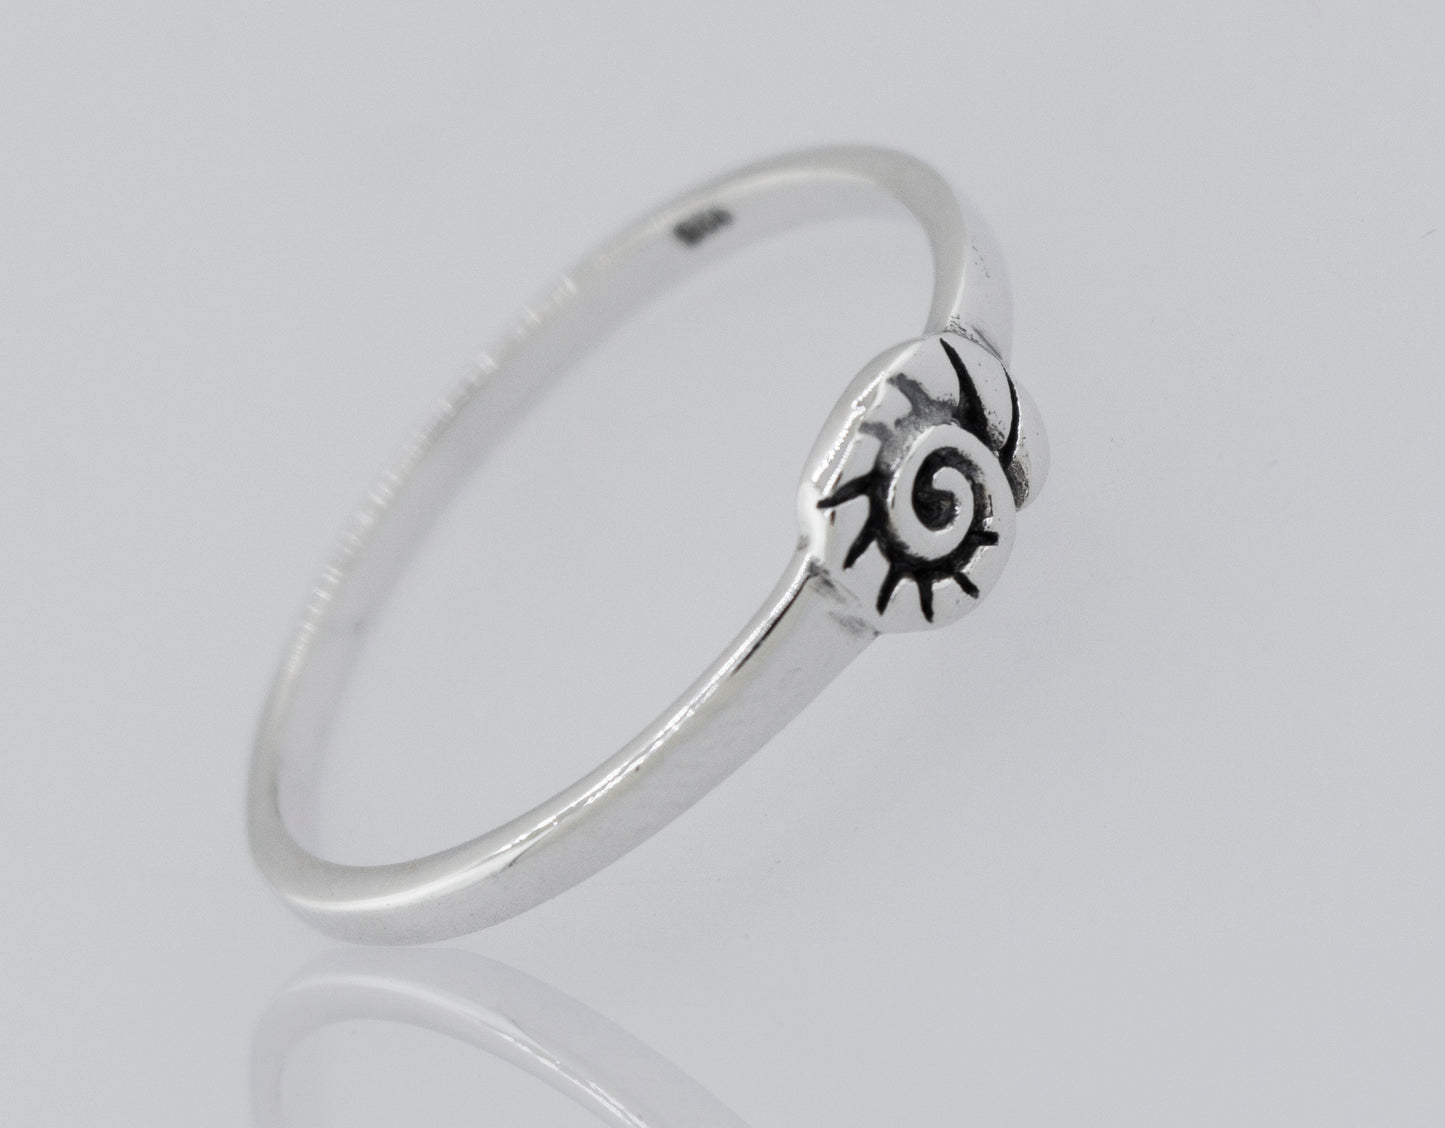 A Super Silver Shell Ring with a high polish black and white design.